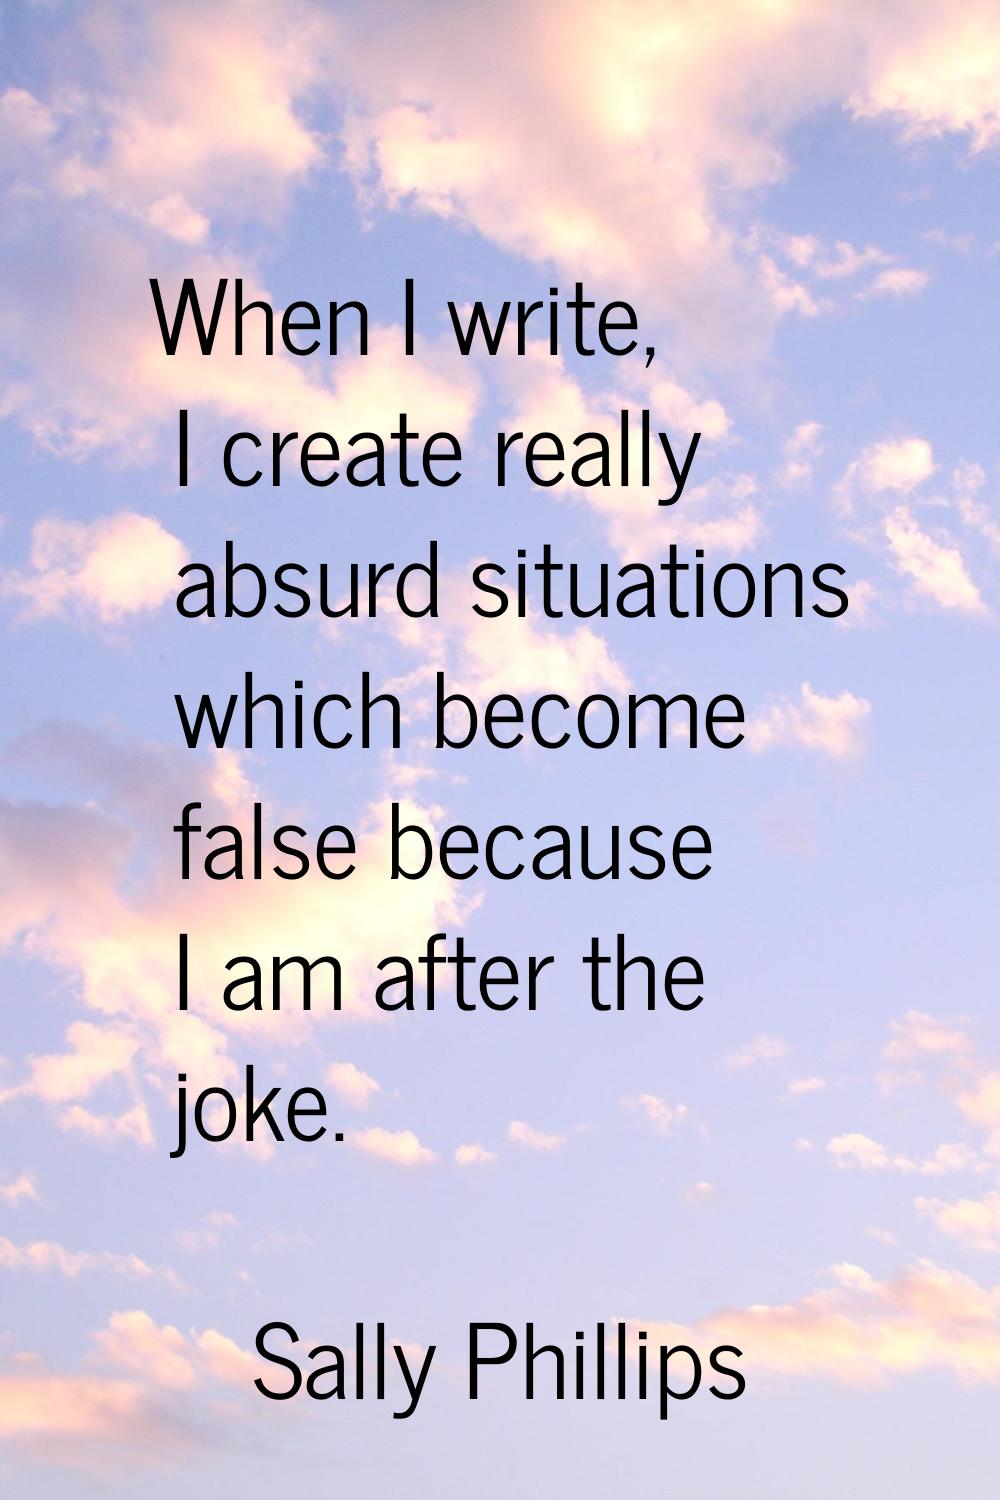 When I write, I create really absurd situations which become false because I am after the joke.